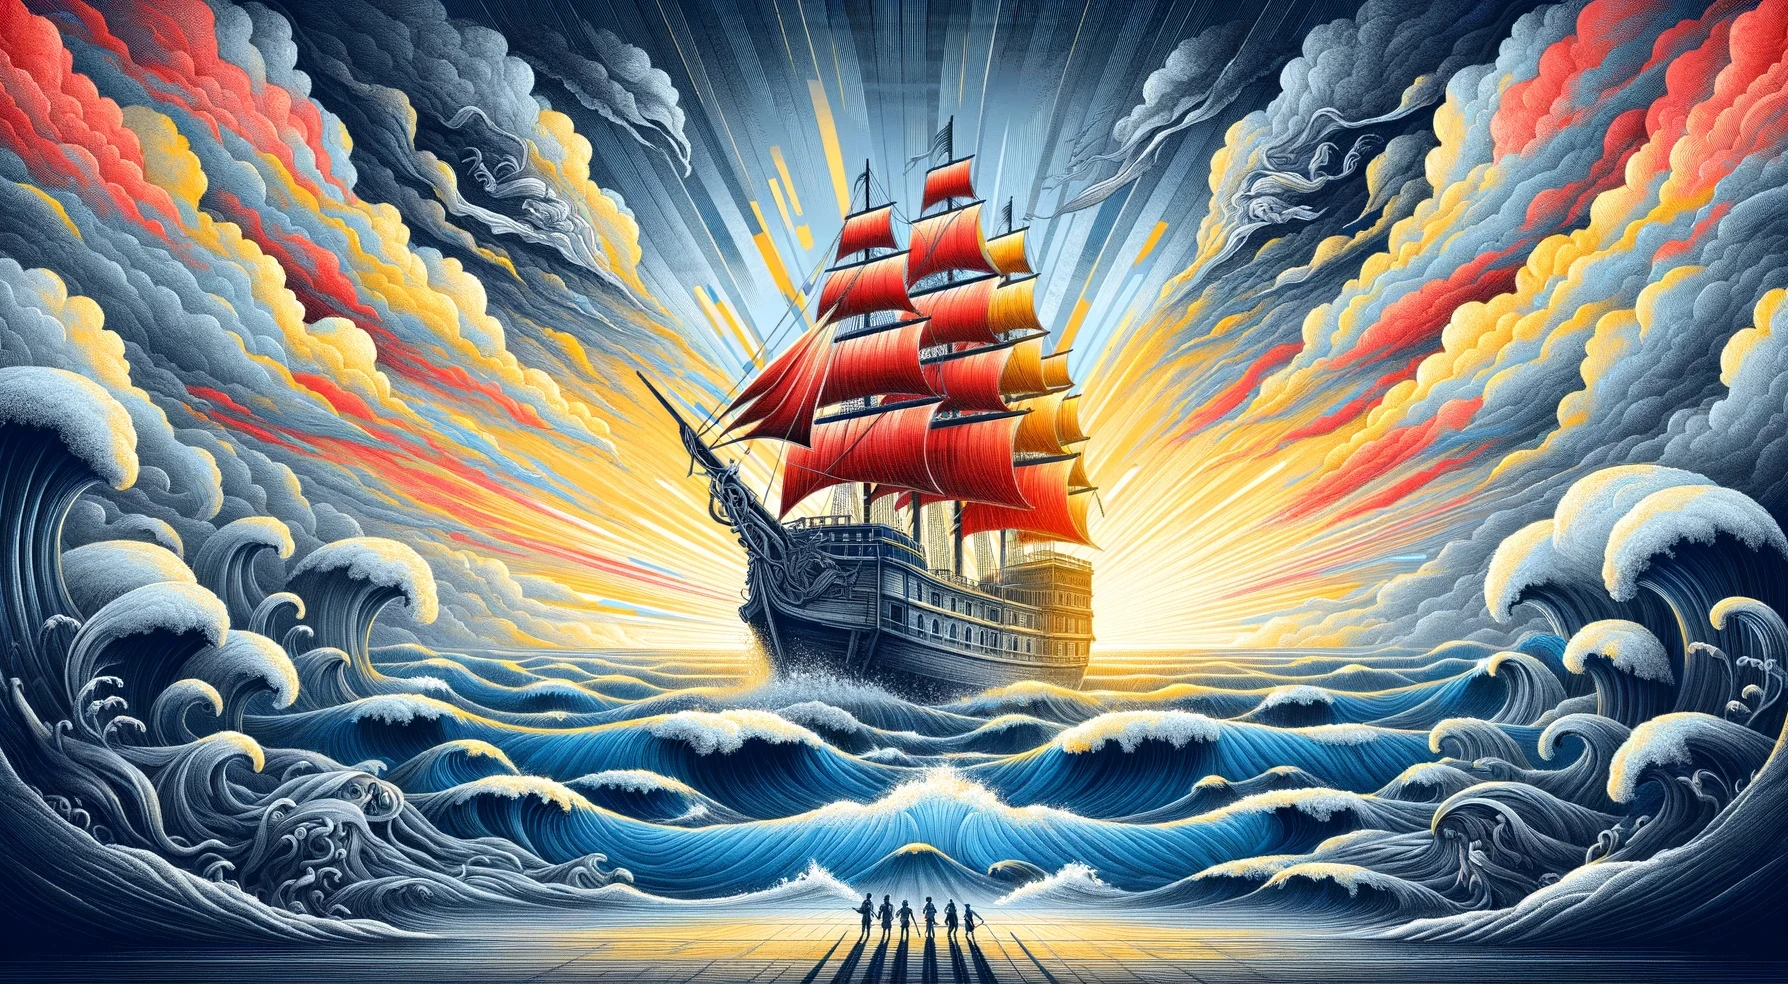 A grand ship ready to set sail on the vast ocean of knowledge, detailed in bright red and blue, dominates this imaginative stage design. The vibrant blue sea with yellow highlights suggests a new beginning at sunrise, with figures boarding the ship in anticipation. The sky transitions from light gray to dark gray, providing a dramatic backdrop for the voyage, while mythical creatures symbolize the challenges and adventures ahead. 